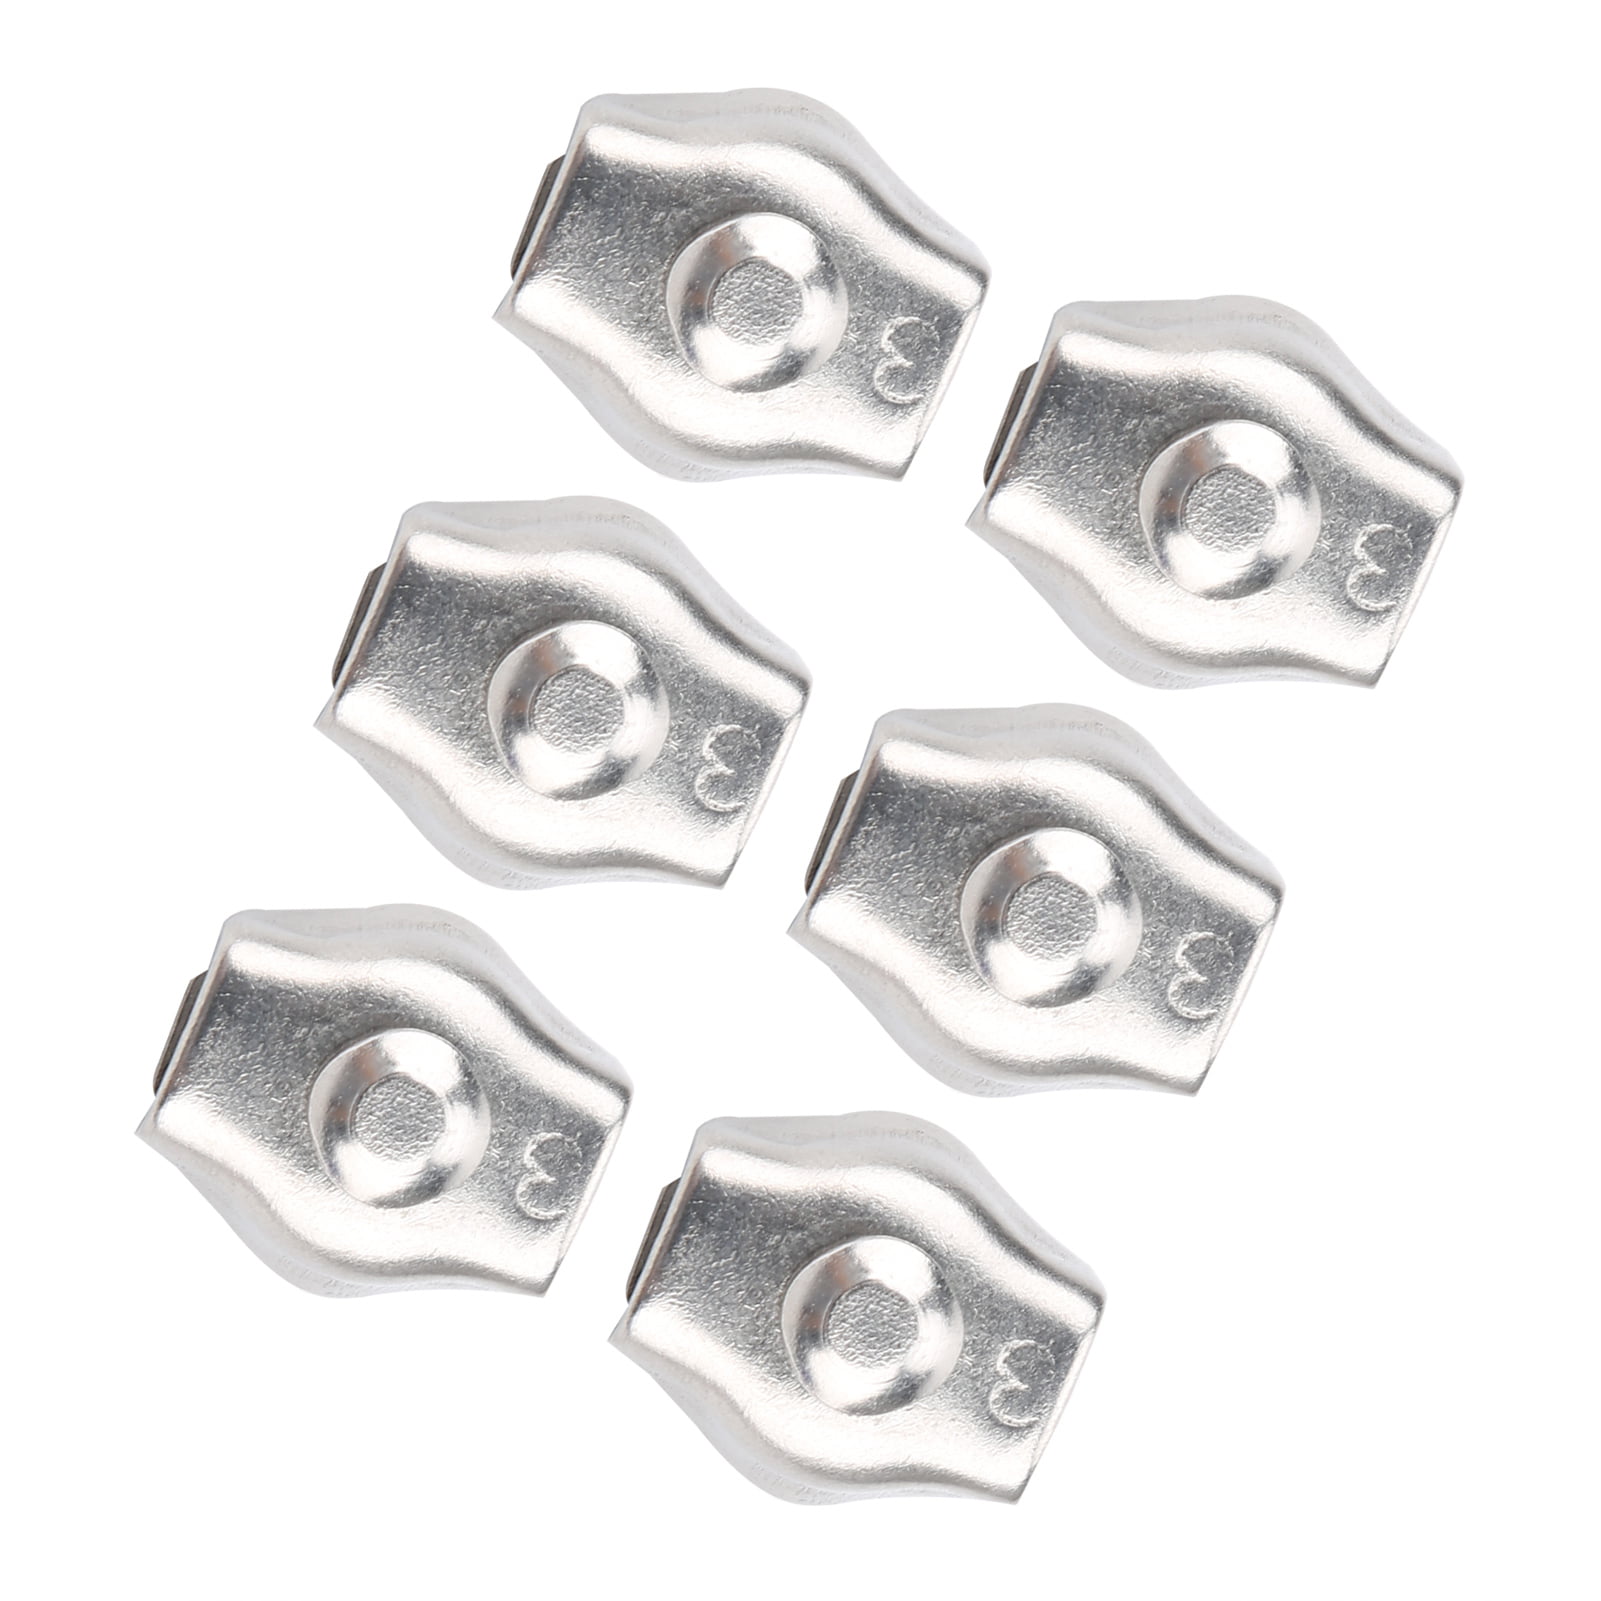 YIUS 20Pcs Steel Wire Rope Chuck Lock 304 Stainless M3 Single Clip Clamp for Industrial Mechanism 